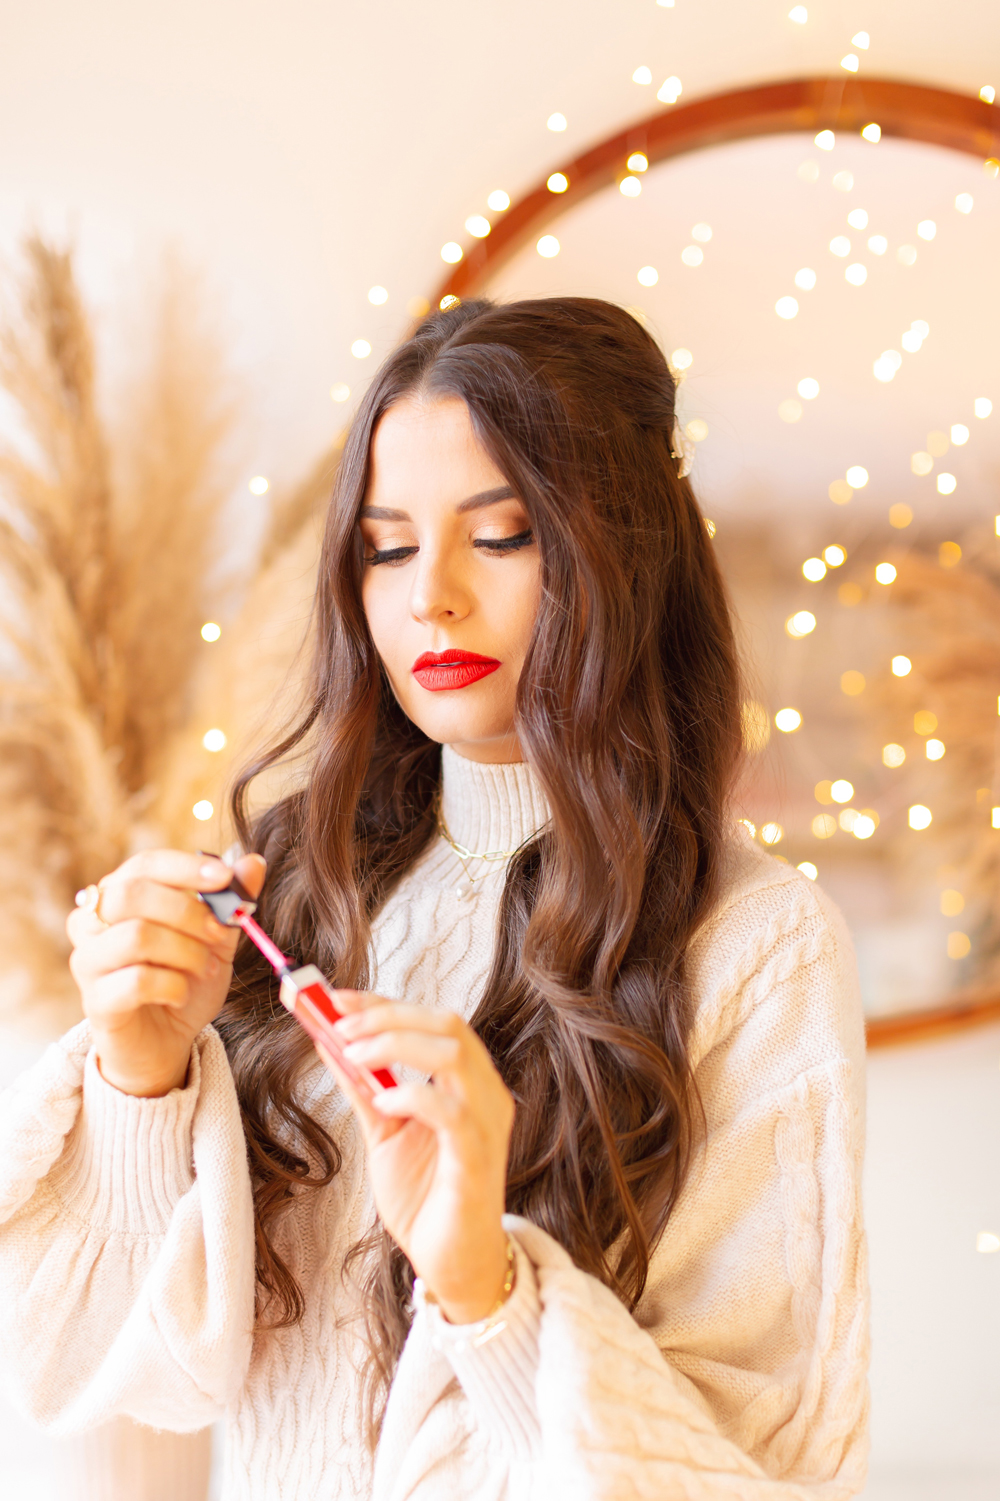 My Top 5 Red Lipsticks for the Holidays | Clove + Hallow Lip Velvet in Fiesta photos, review, swatches | Brunette woman wearing a red lipstick and cable kit sweater dress in a festive holiday setting with bokeh lights | Best clean vegan red lipstick | Best carmine free red lipstick | Best Vegan Lipstick for the Holidays | Best red liquid lipstick | Best long lasting red lipstick | Christmas lipstick 2021 | Mask friendly red lipstick | Calgary Beauty Blogger // JustineCelina.com